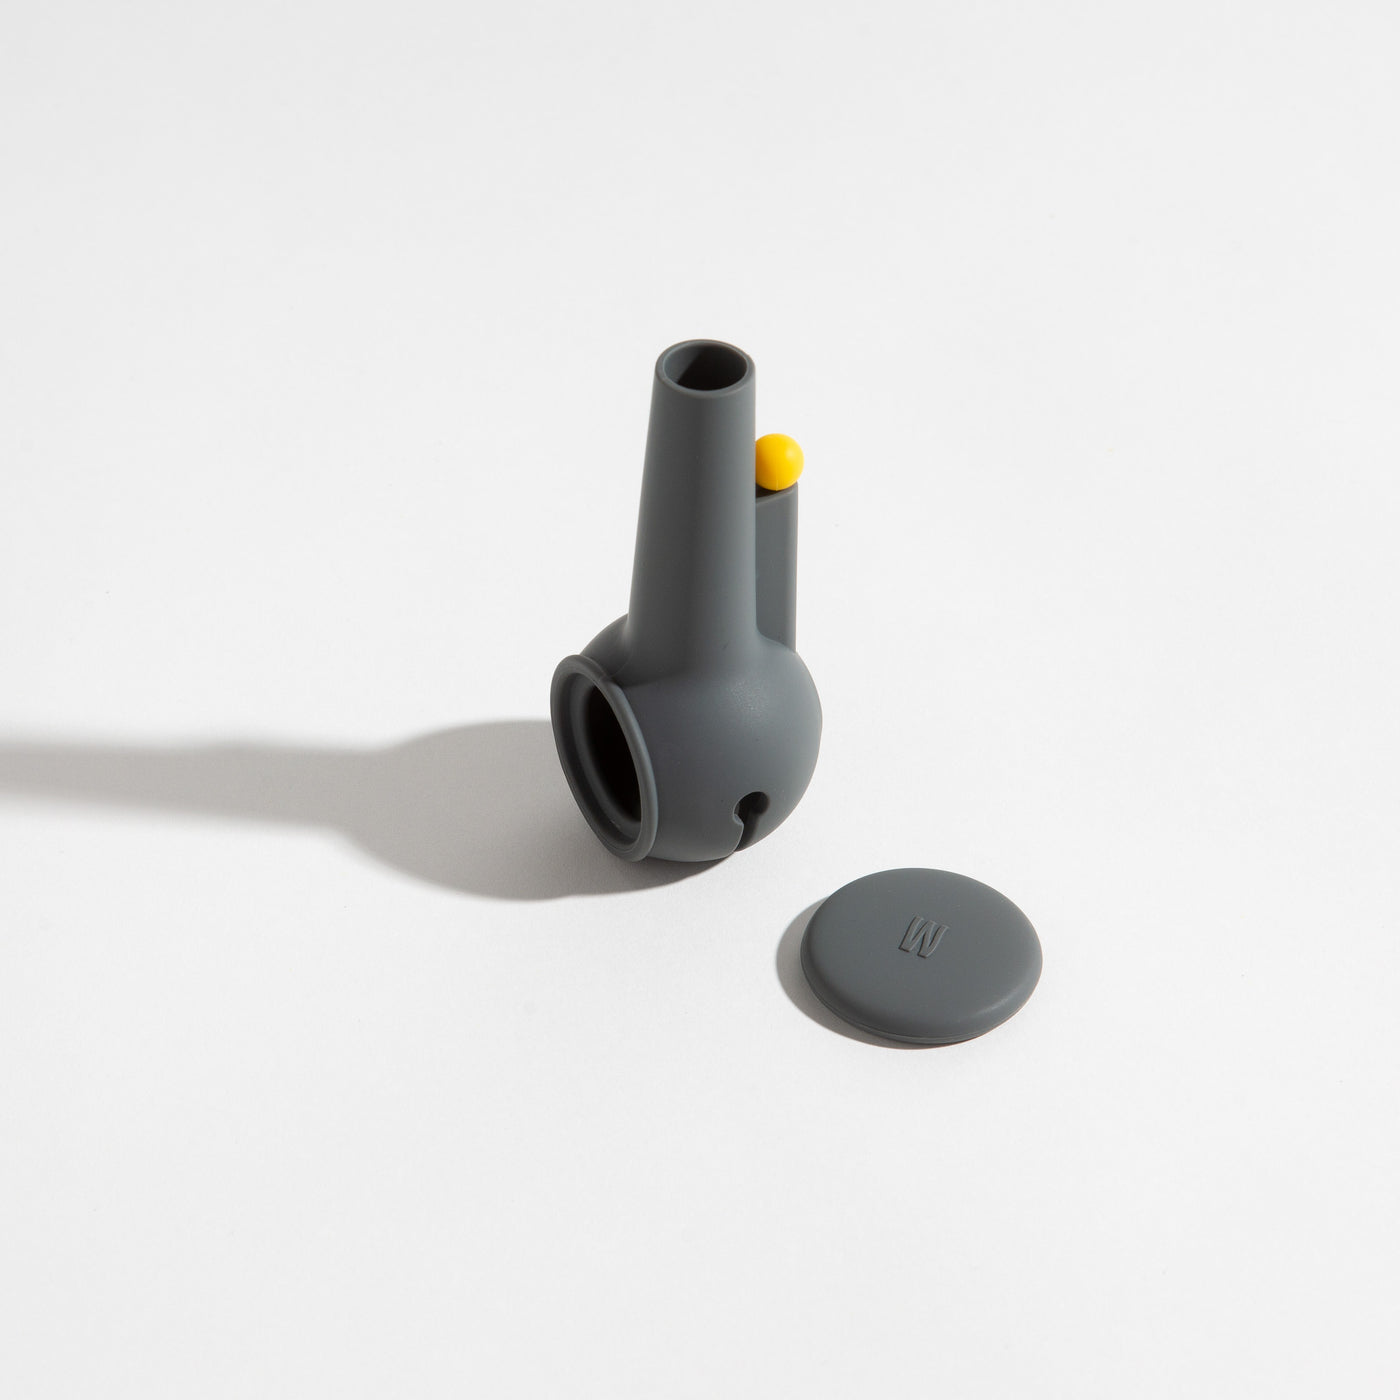 Smoke gray silicone pipe cover for glass pipe protection on a white background